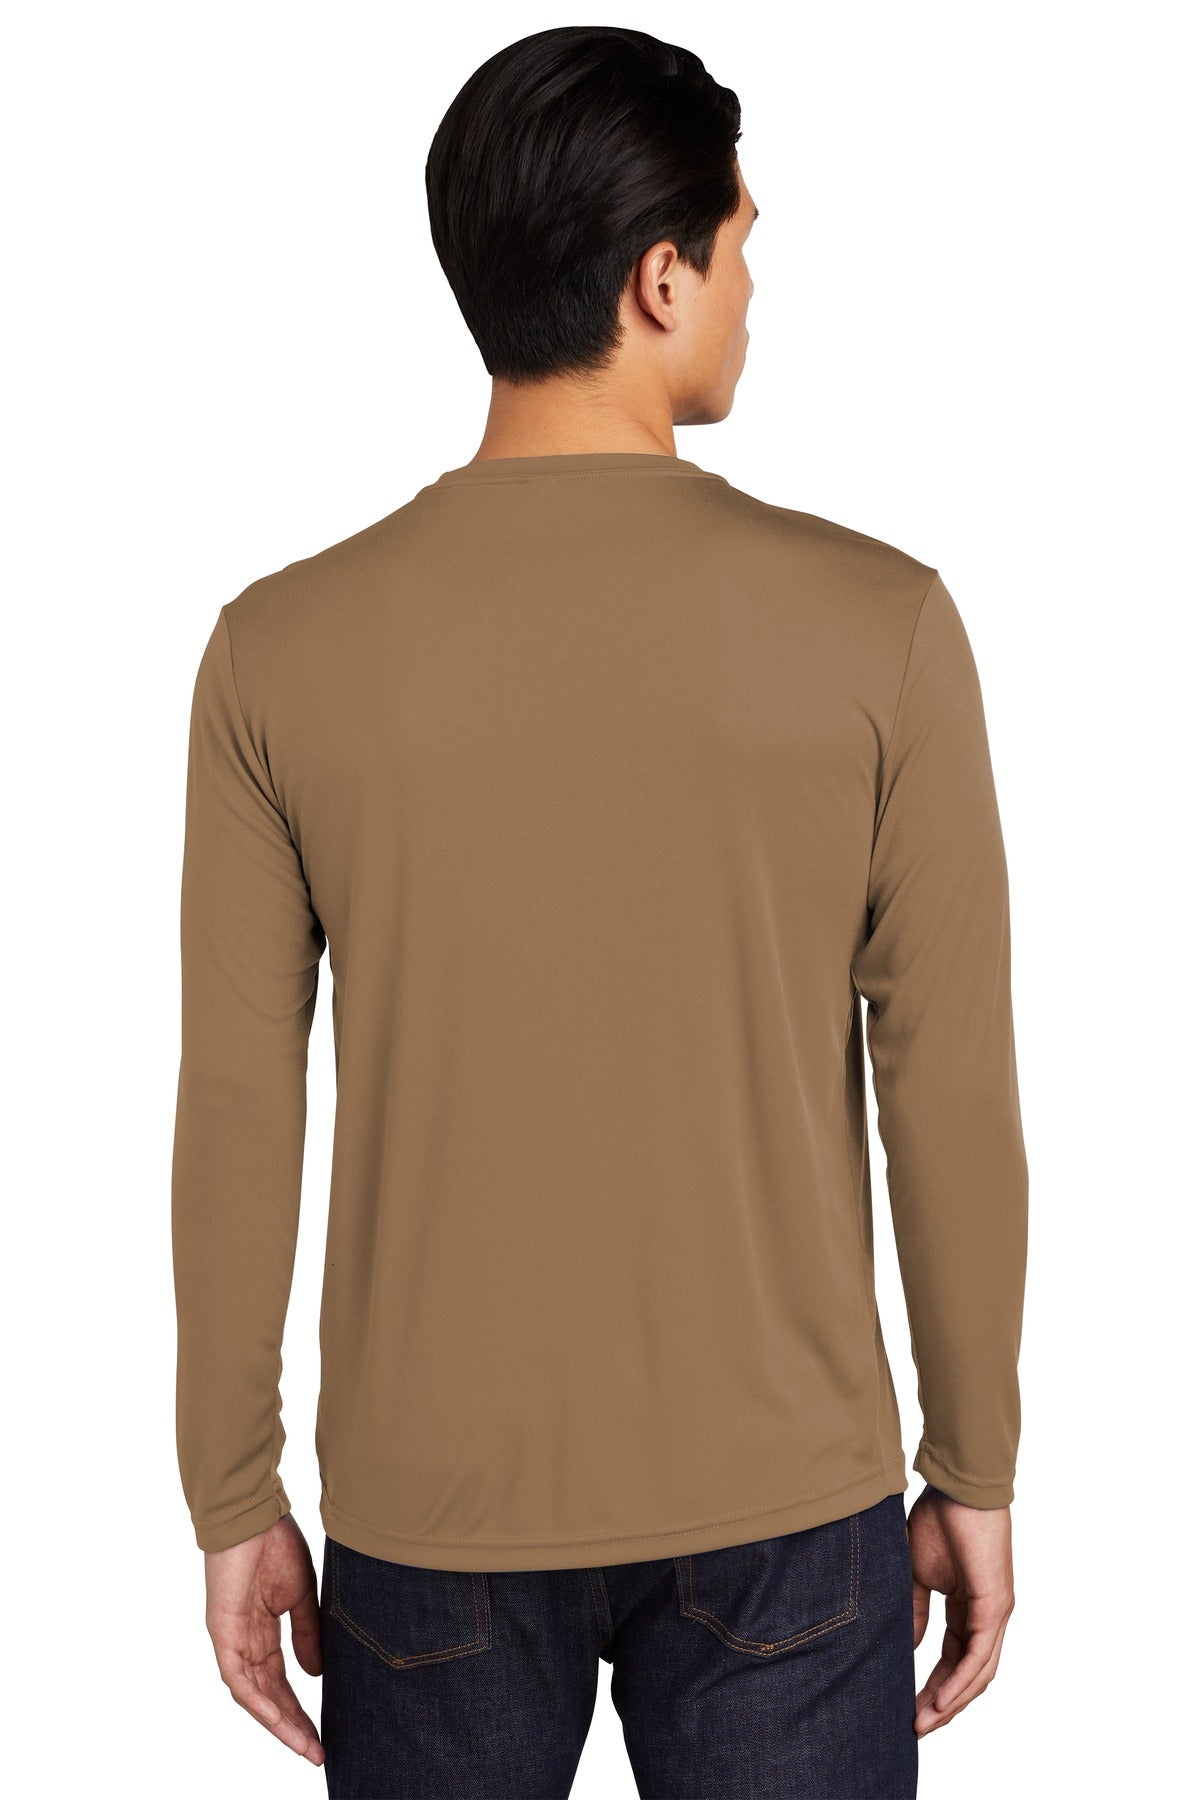 Sport-Tek® Long Sleeve PosiCharge® Competitor™ Tee. ST350LS [Woodland Brown] - DFW Impression